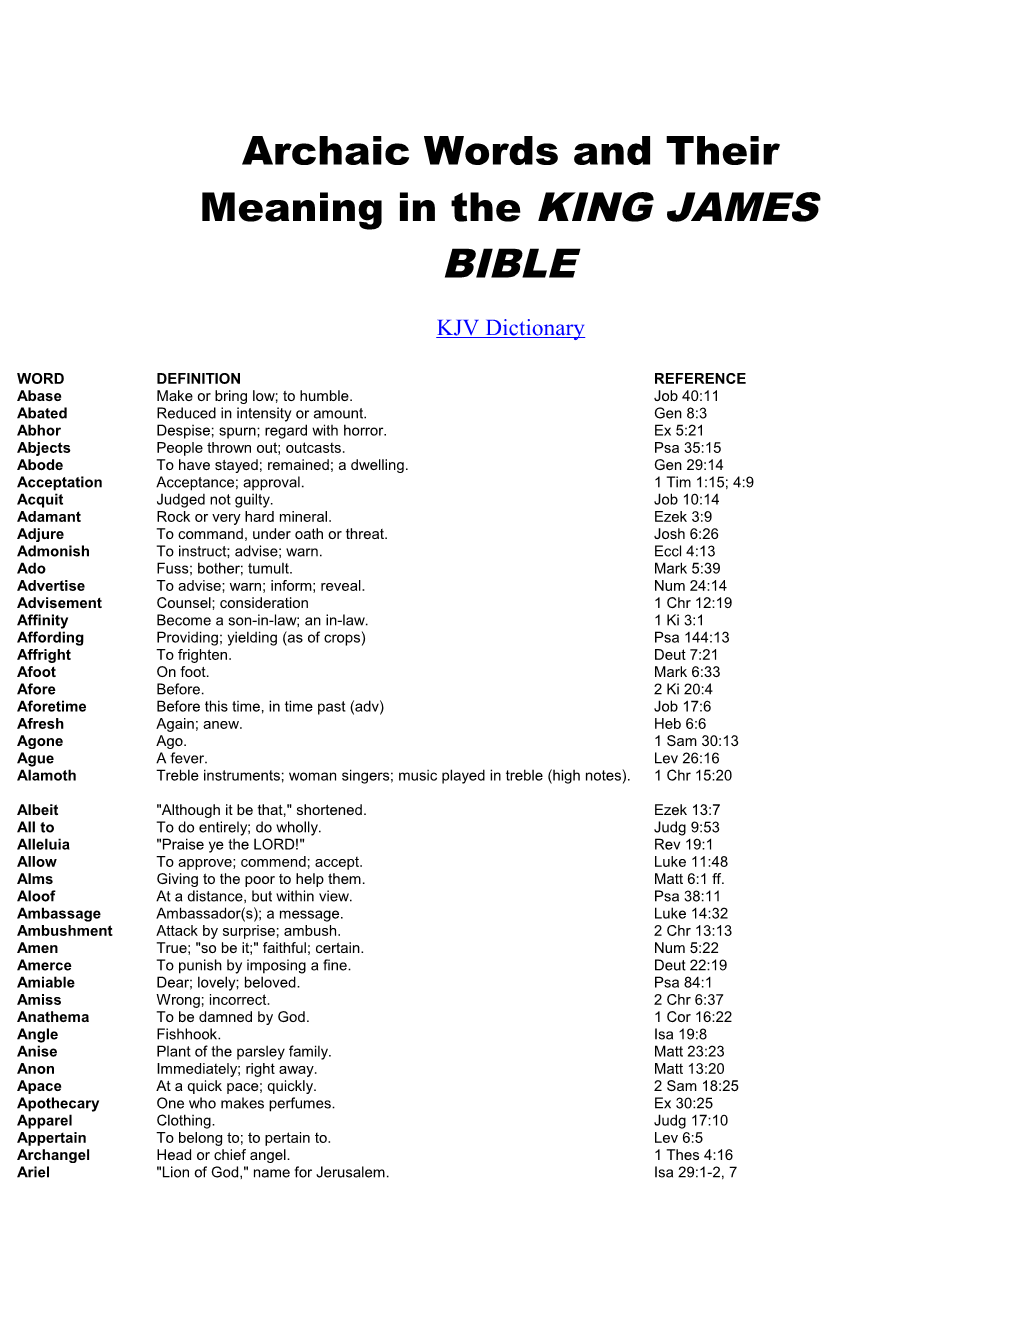 Archaic Words and Their Meaning in the KING JAMES BIBLE